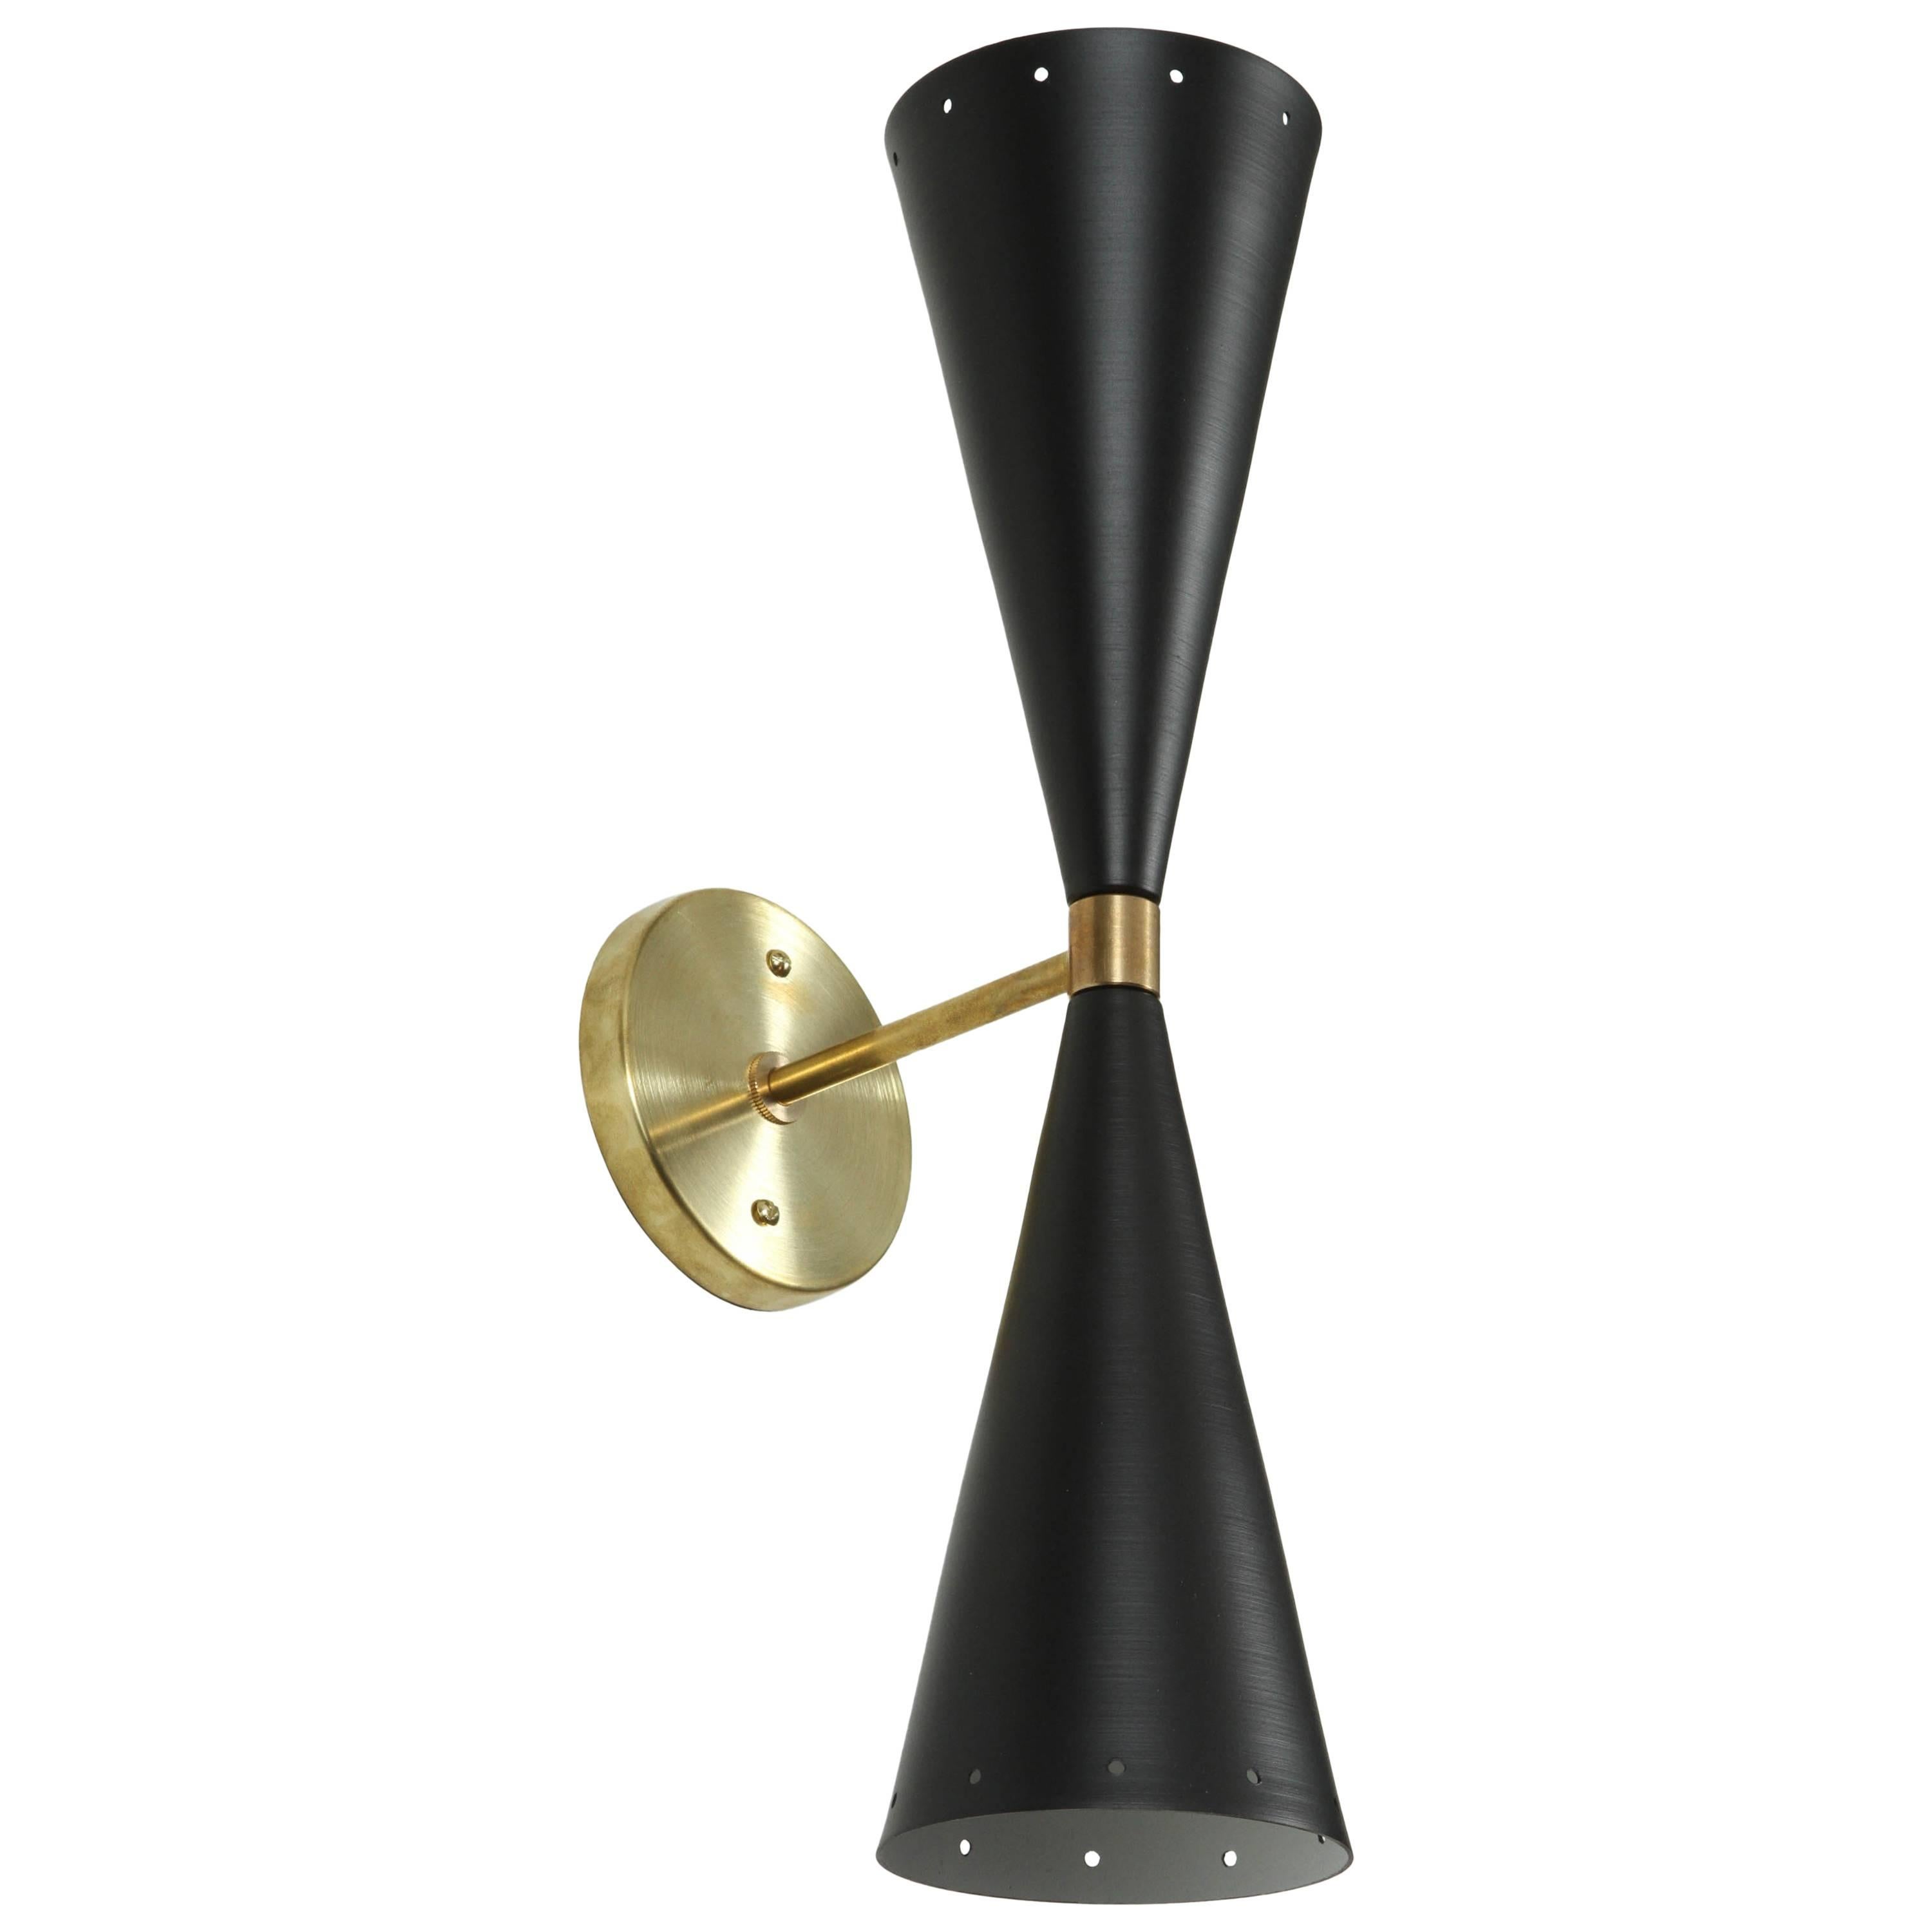 Black and Brass Double Cone Sconce by Lawson-Fenning. The double cone sconce features two tapered cones, in either black or white, with small perforations at both ends with a brass backplate and spacer. 

The Lawson-Fenning Collection is designed